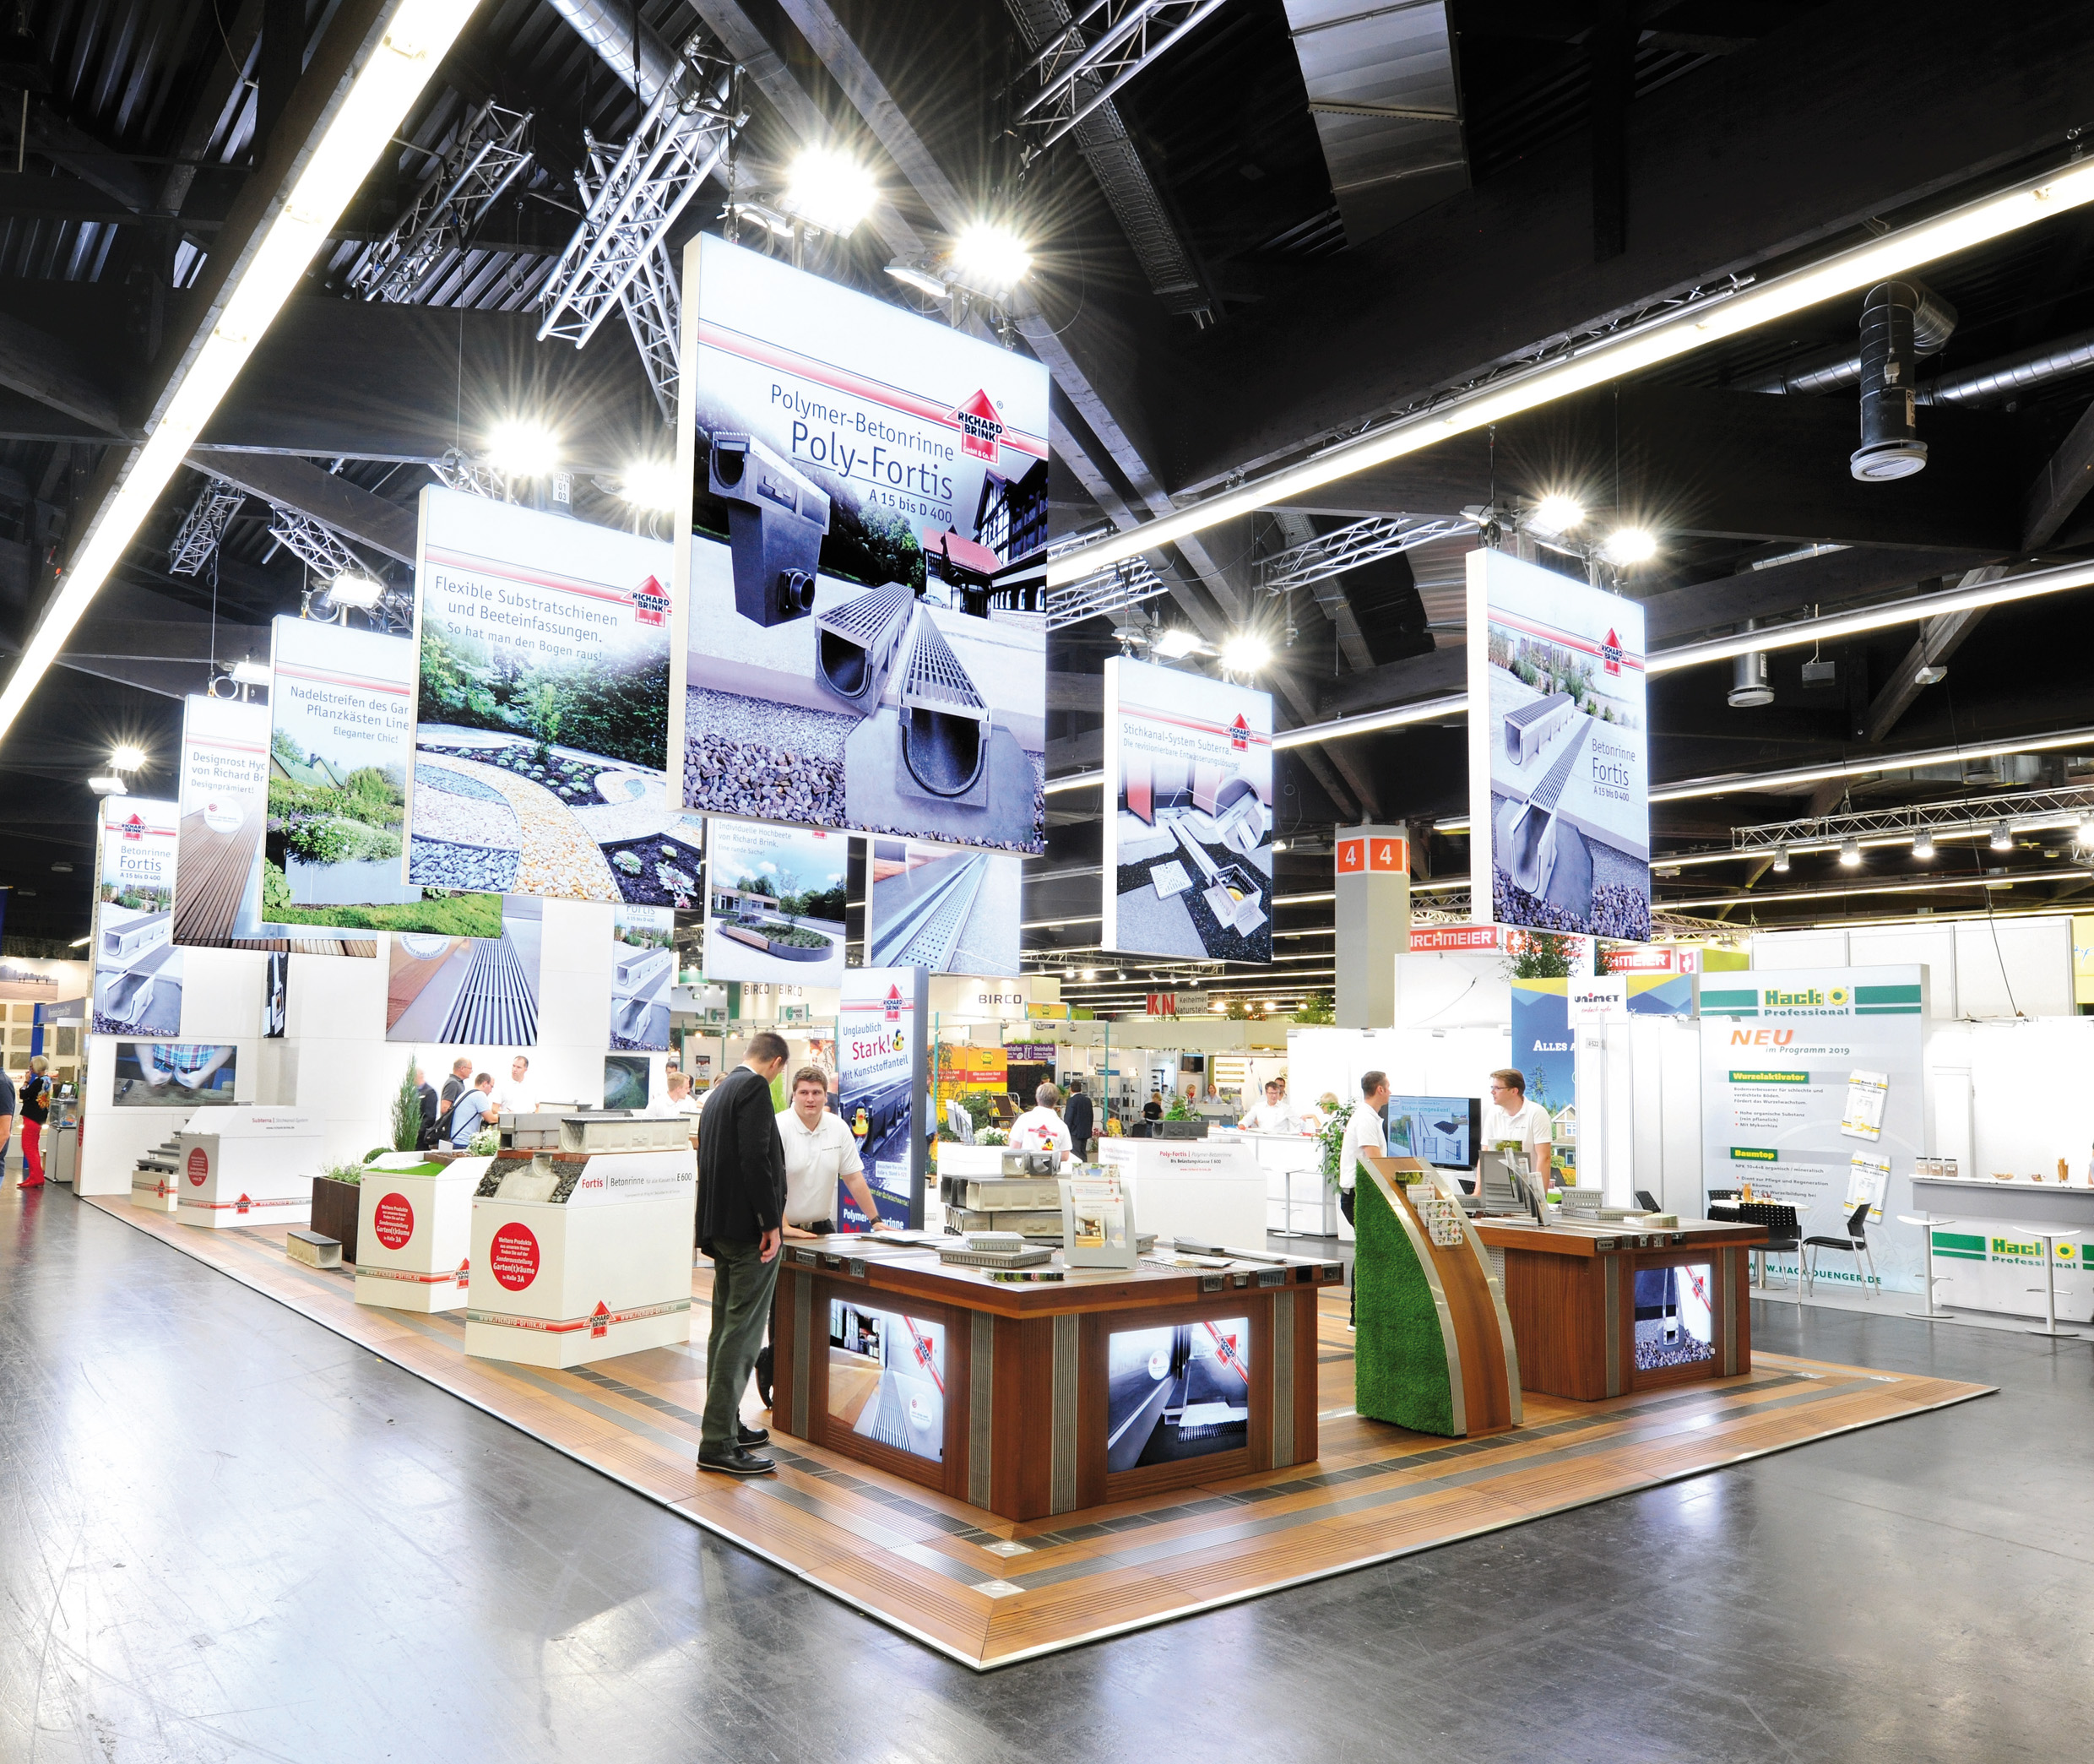 Bright, modern and inviting: this is how Richard Brink presented itself to countless visitors over 148 square metres of exhibition space at GaLaBau 2018.